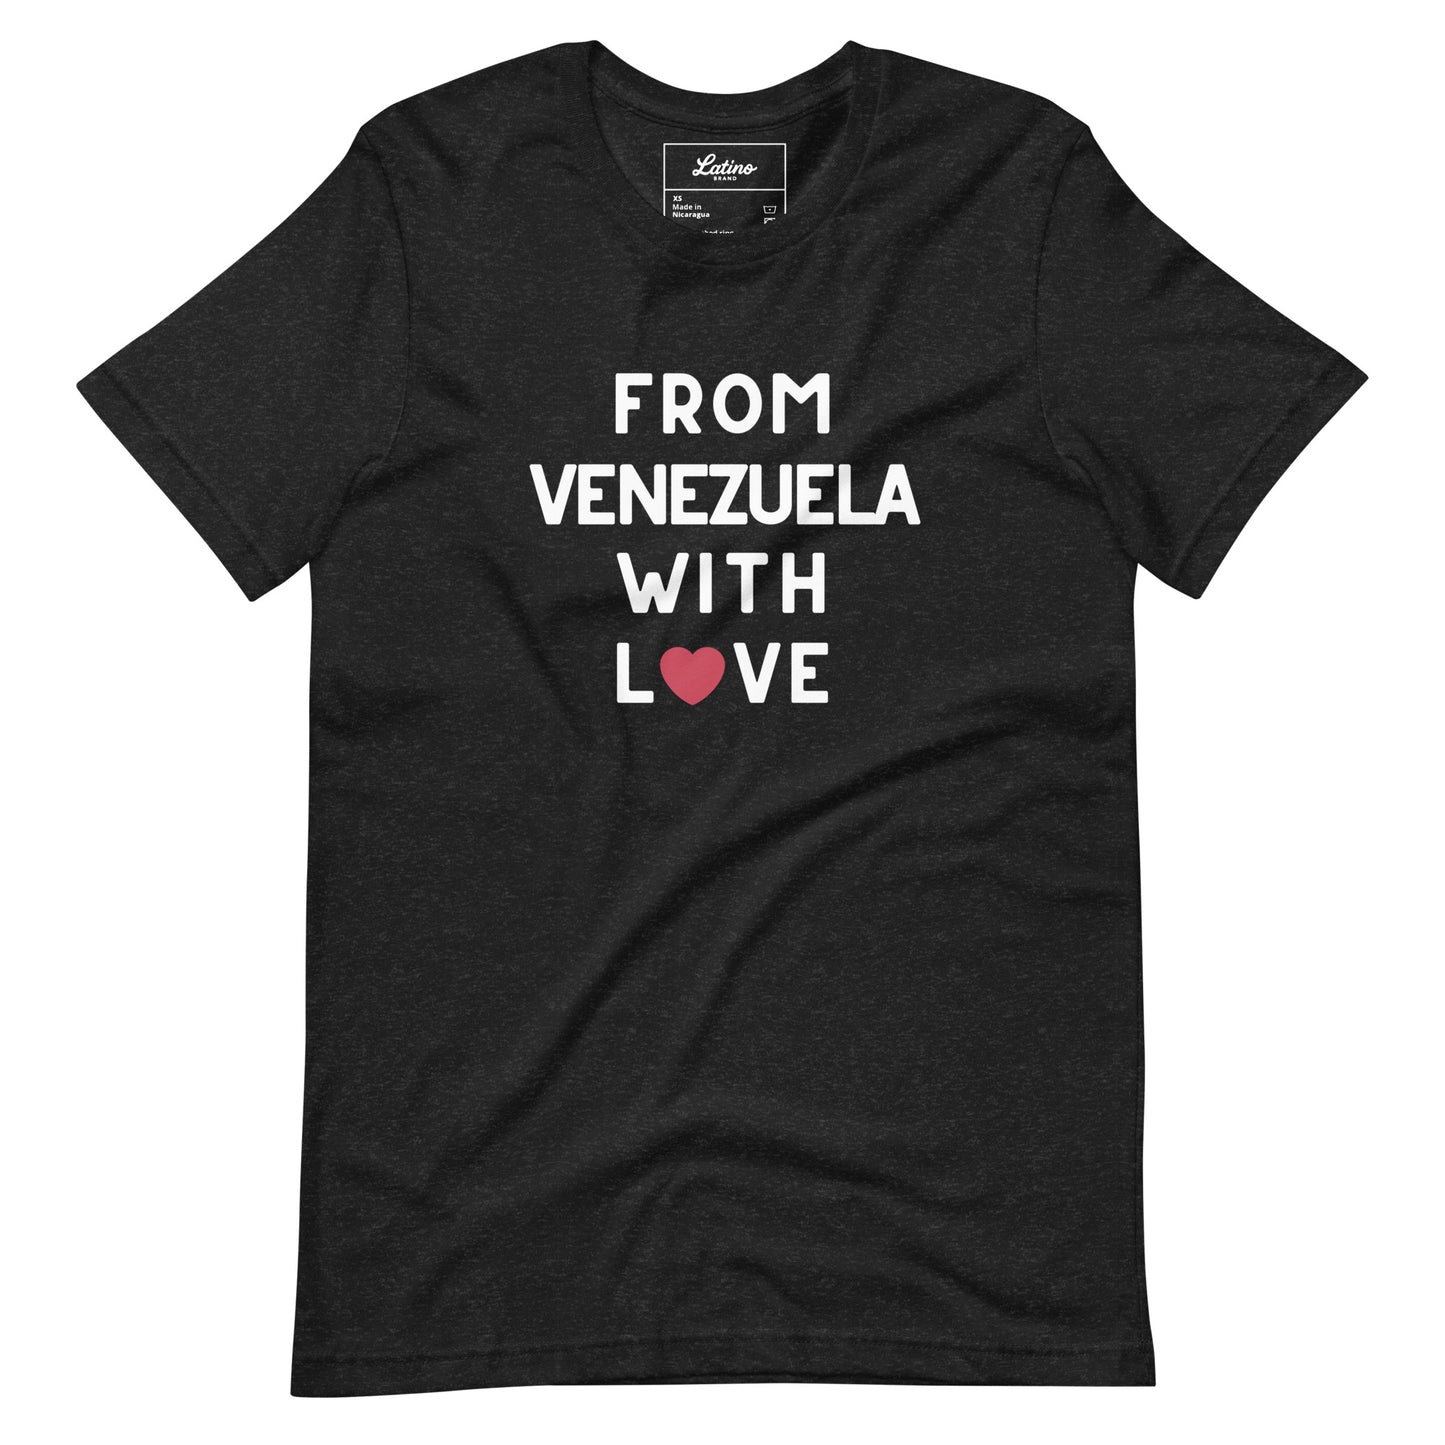 🇻🇪 From Venezuela With Love